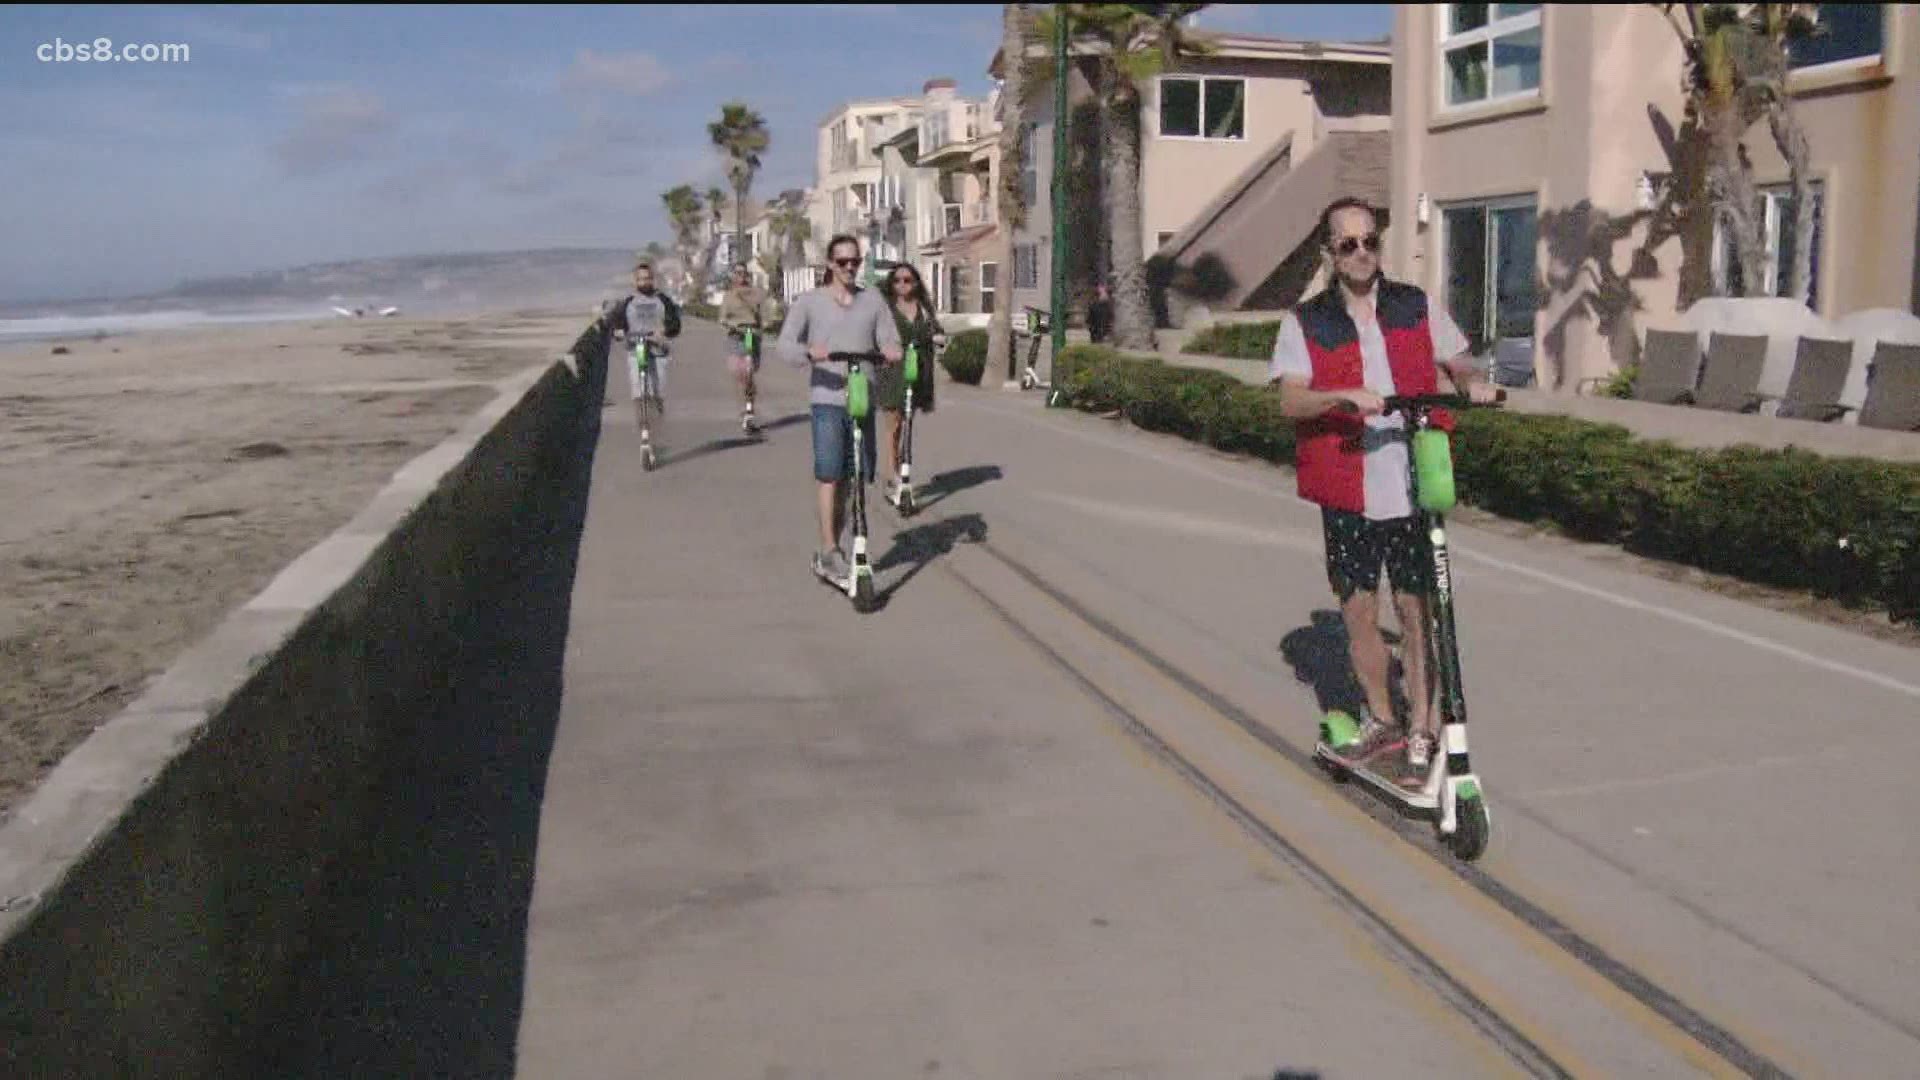 City leaders are taking steps to limit the number of scooters in San Diego but first, have to come up with a set of safety regulations and enforcement measures